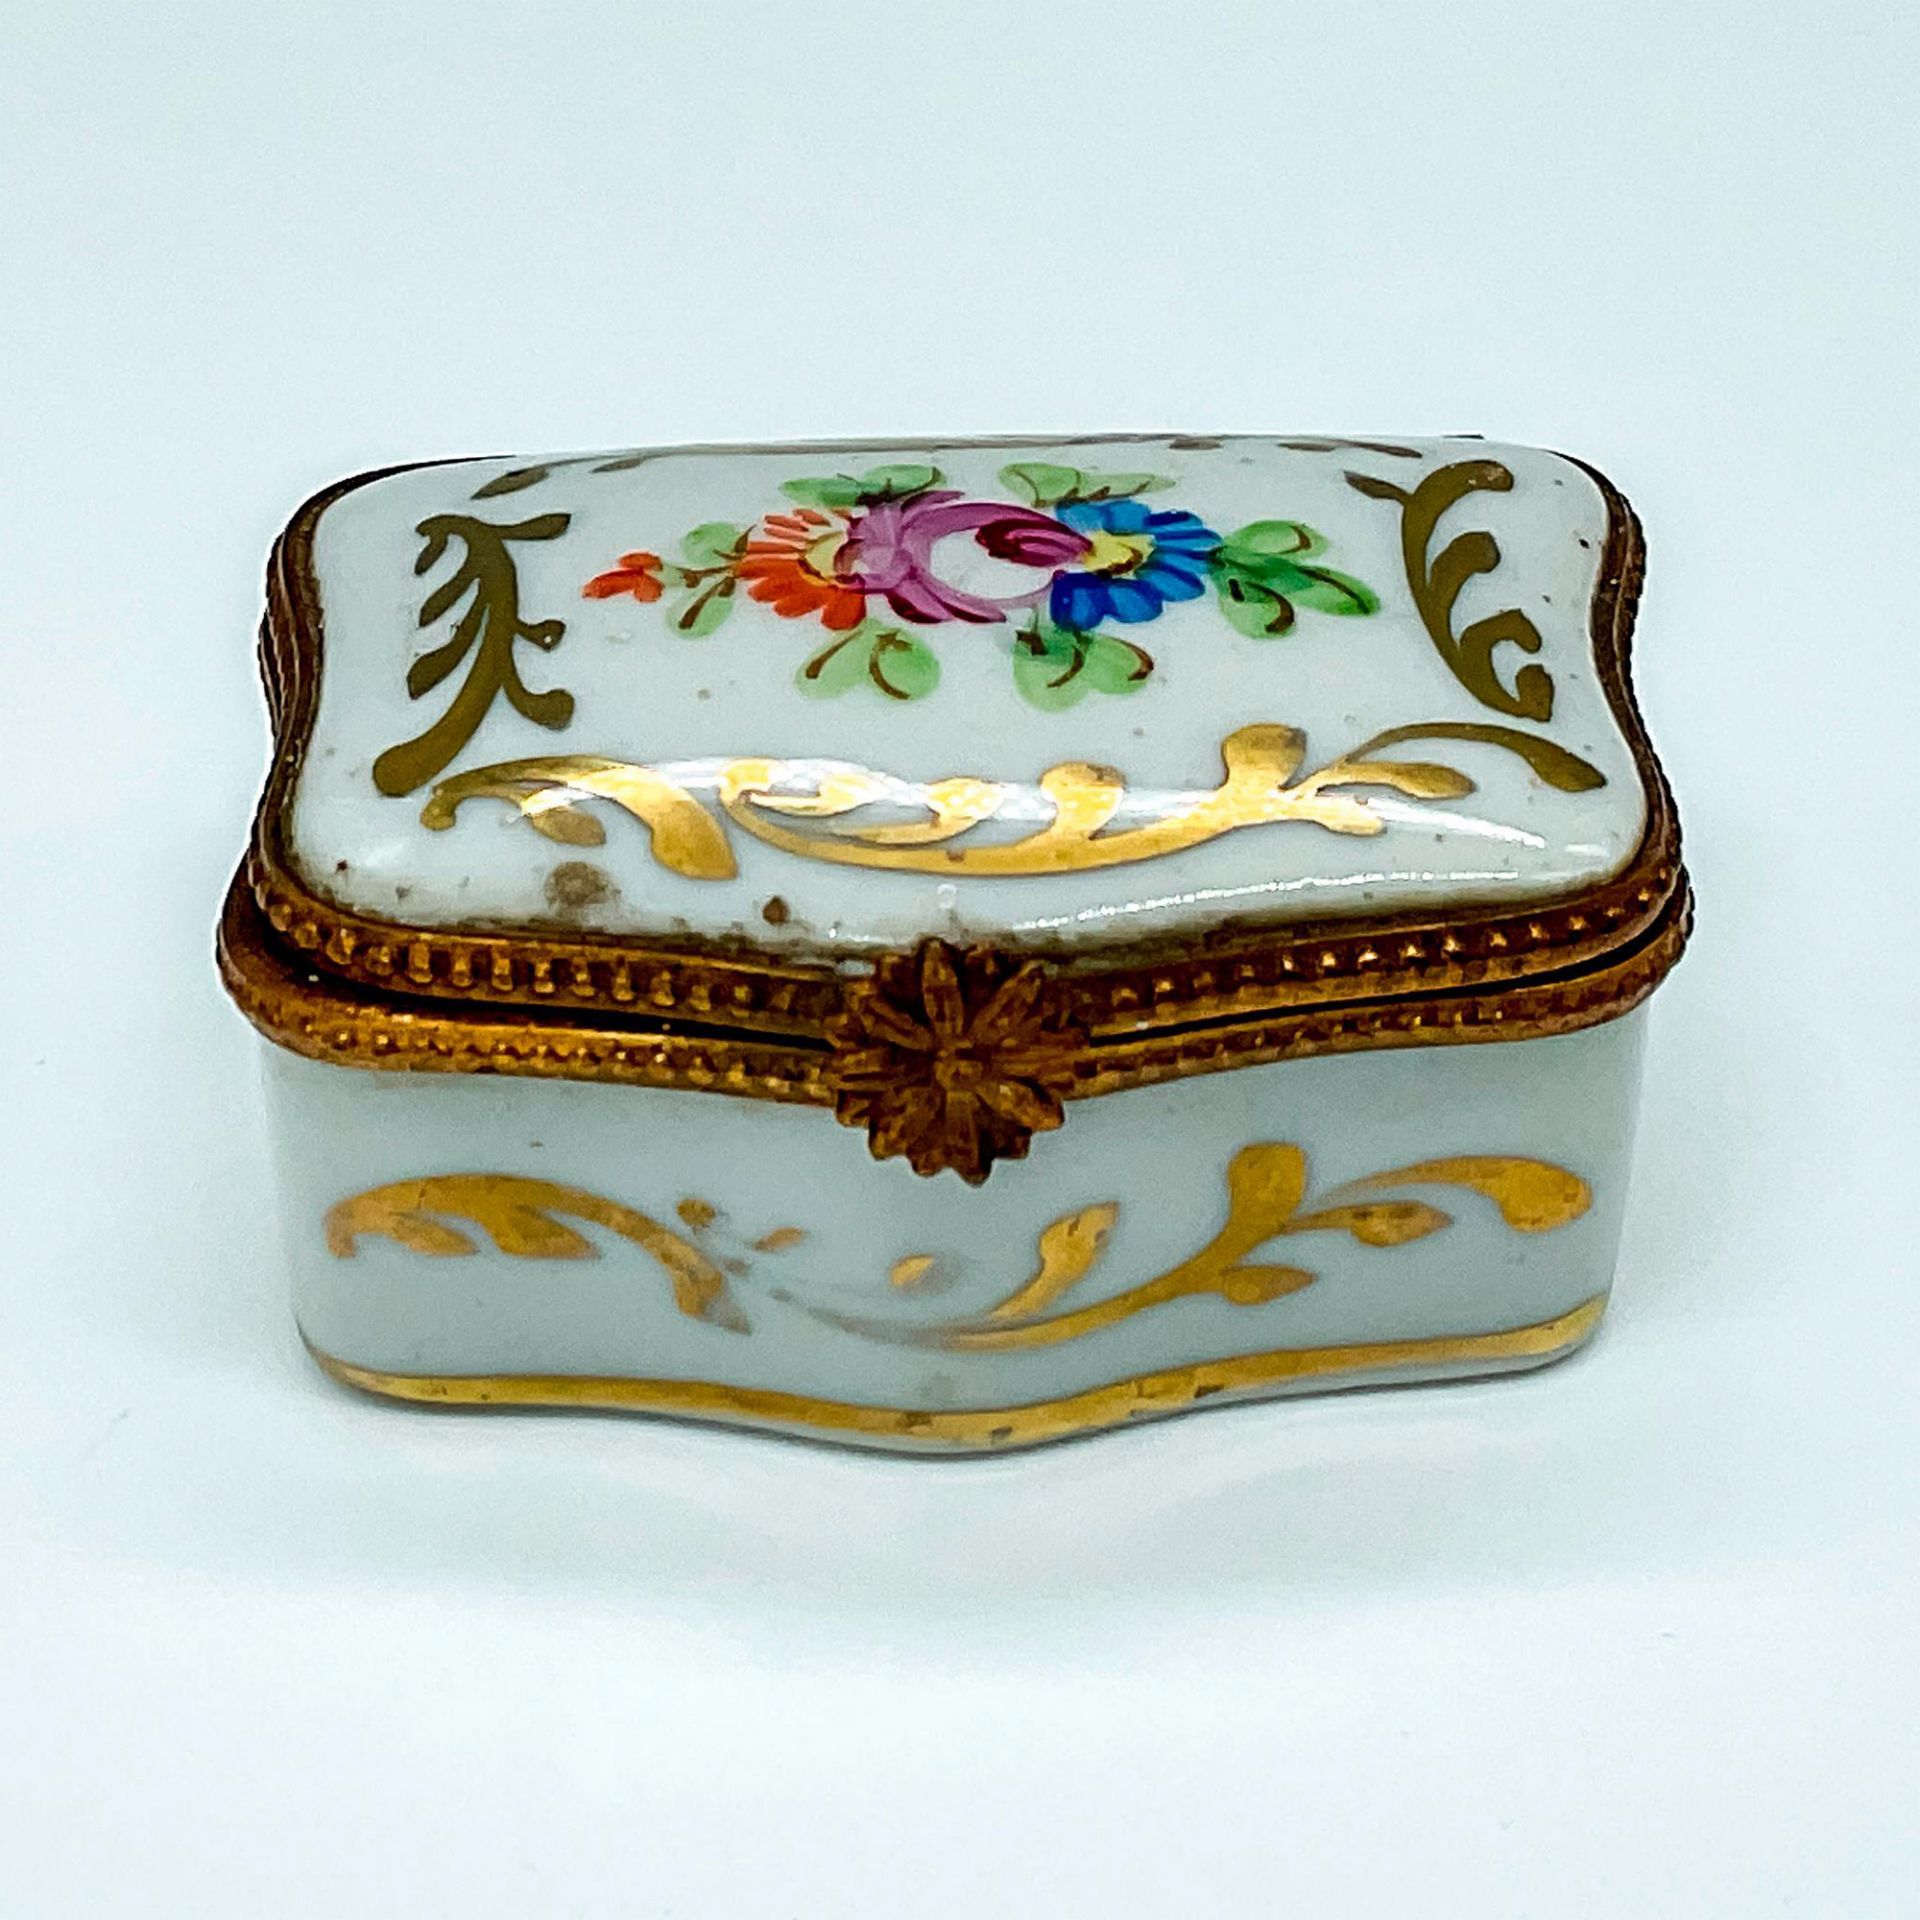 Vintage Limoges Porcelain Hand Painted Box, White and Gold